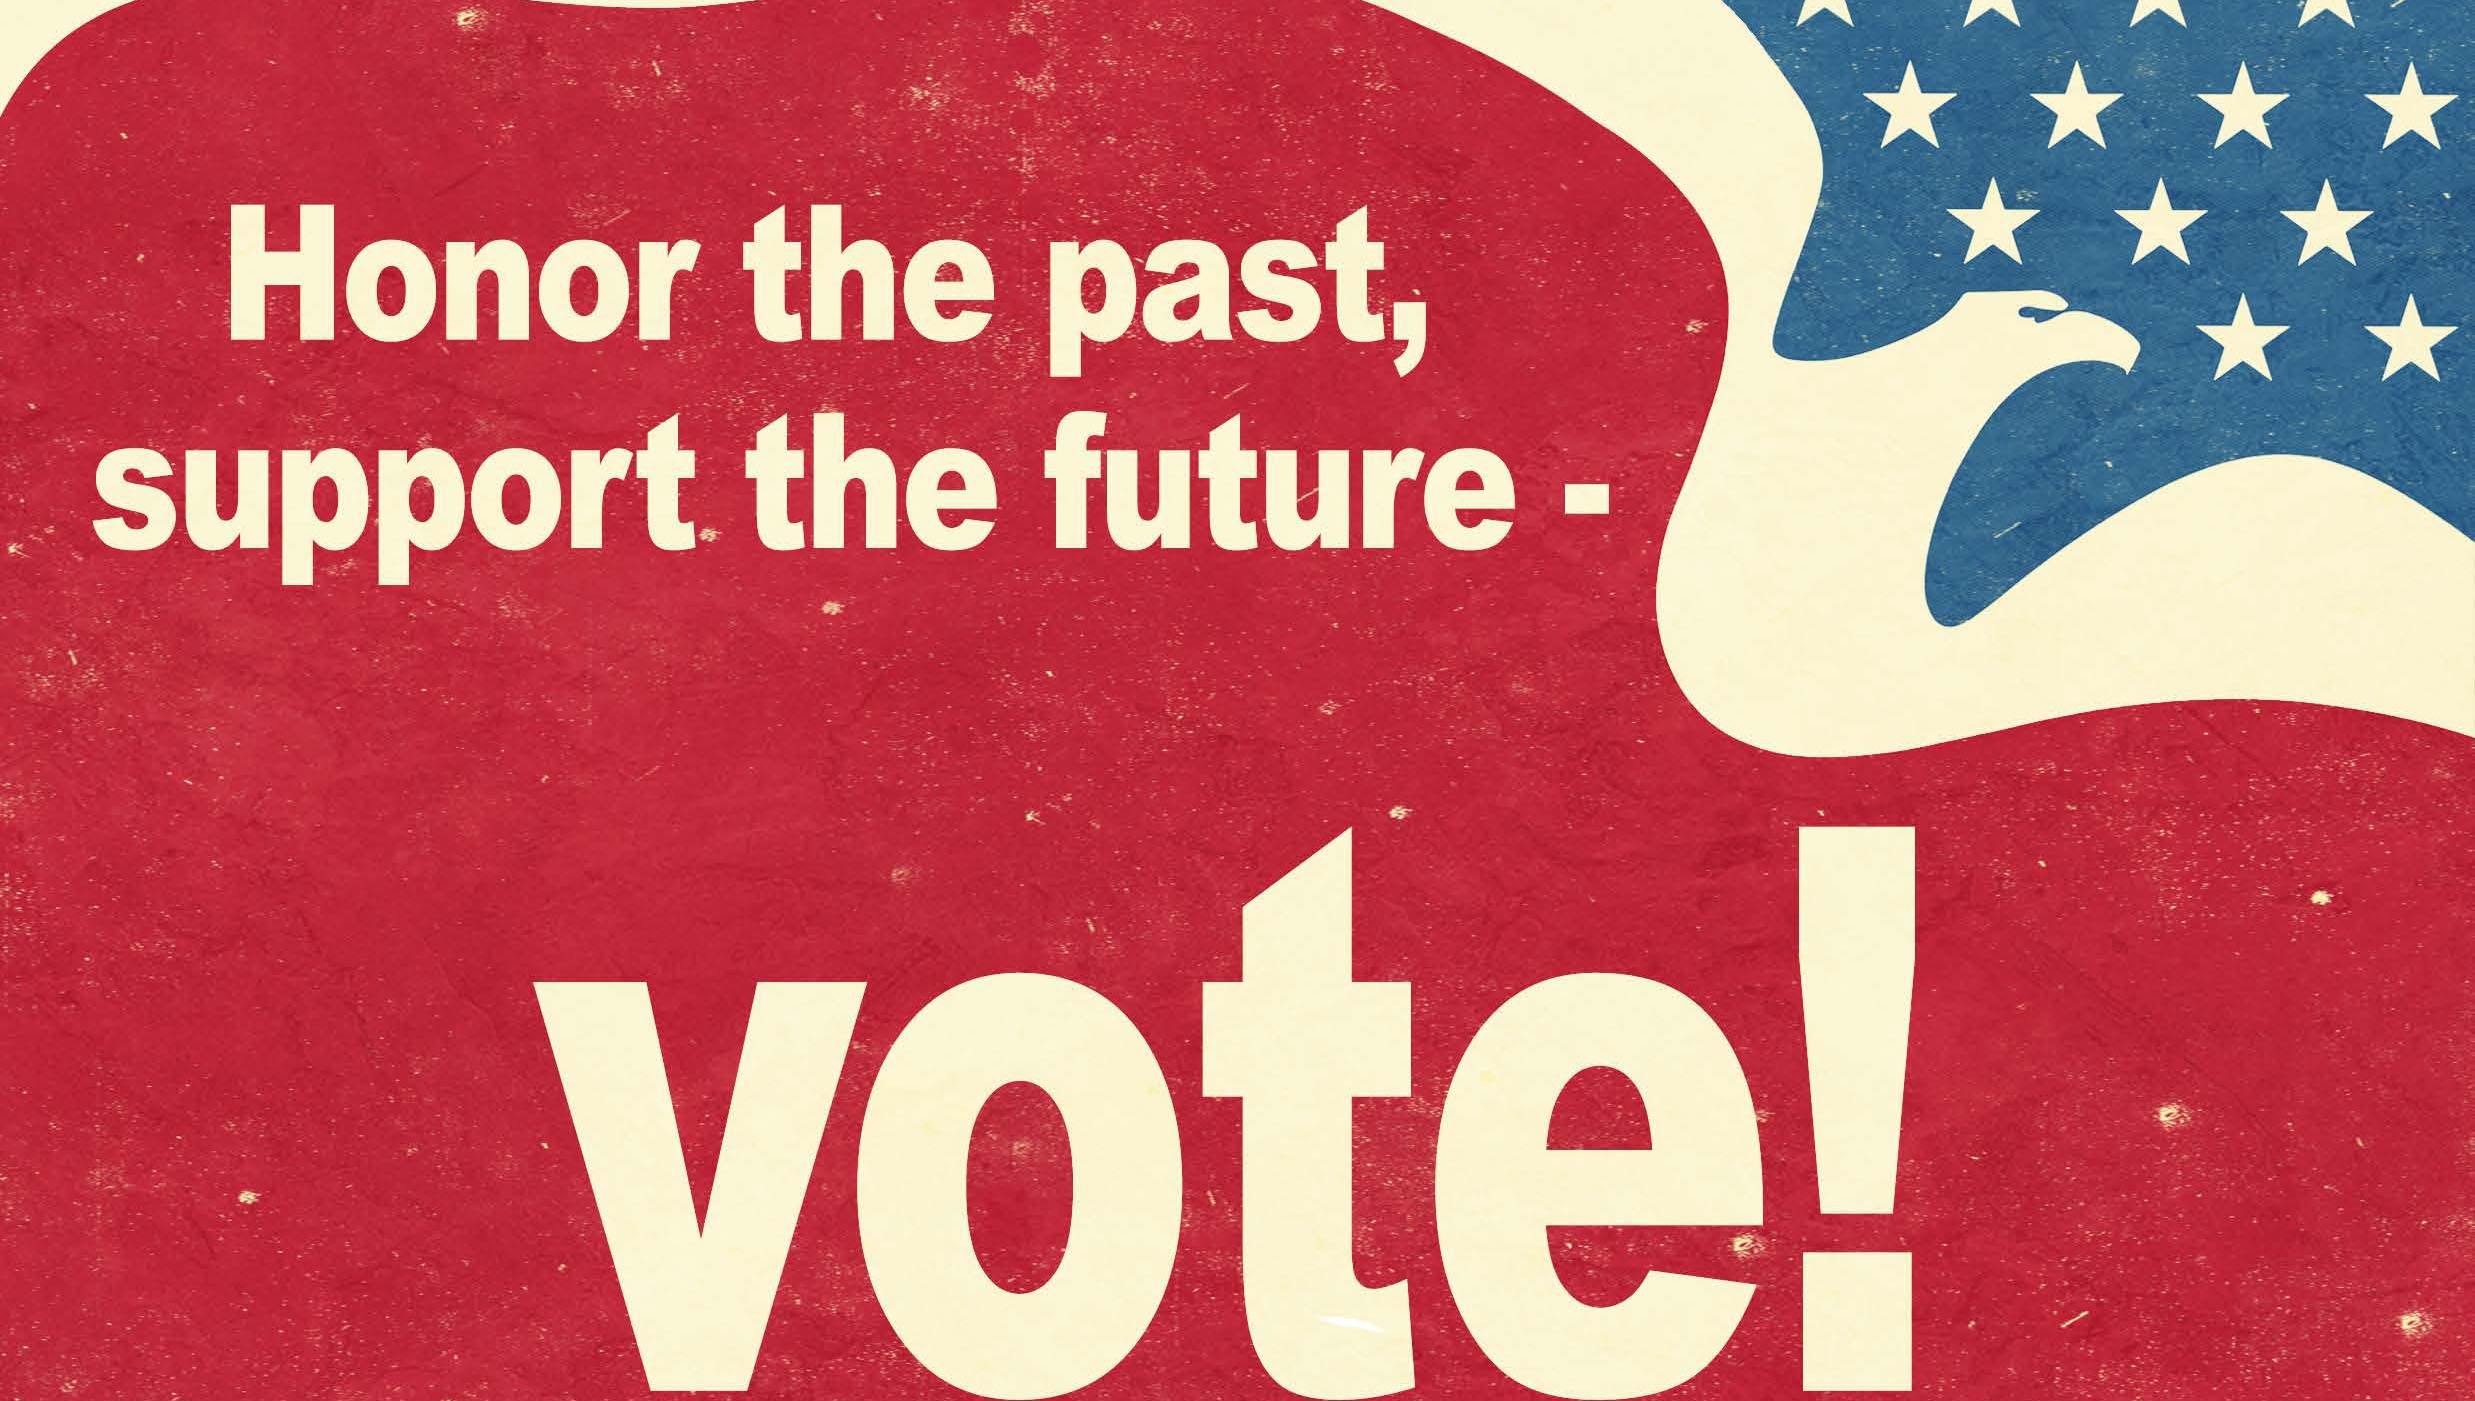 Red, White, and Blue American graphic art with the text "Honor the Past, support the future - vote!"